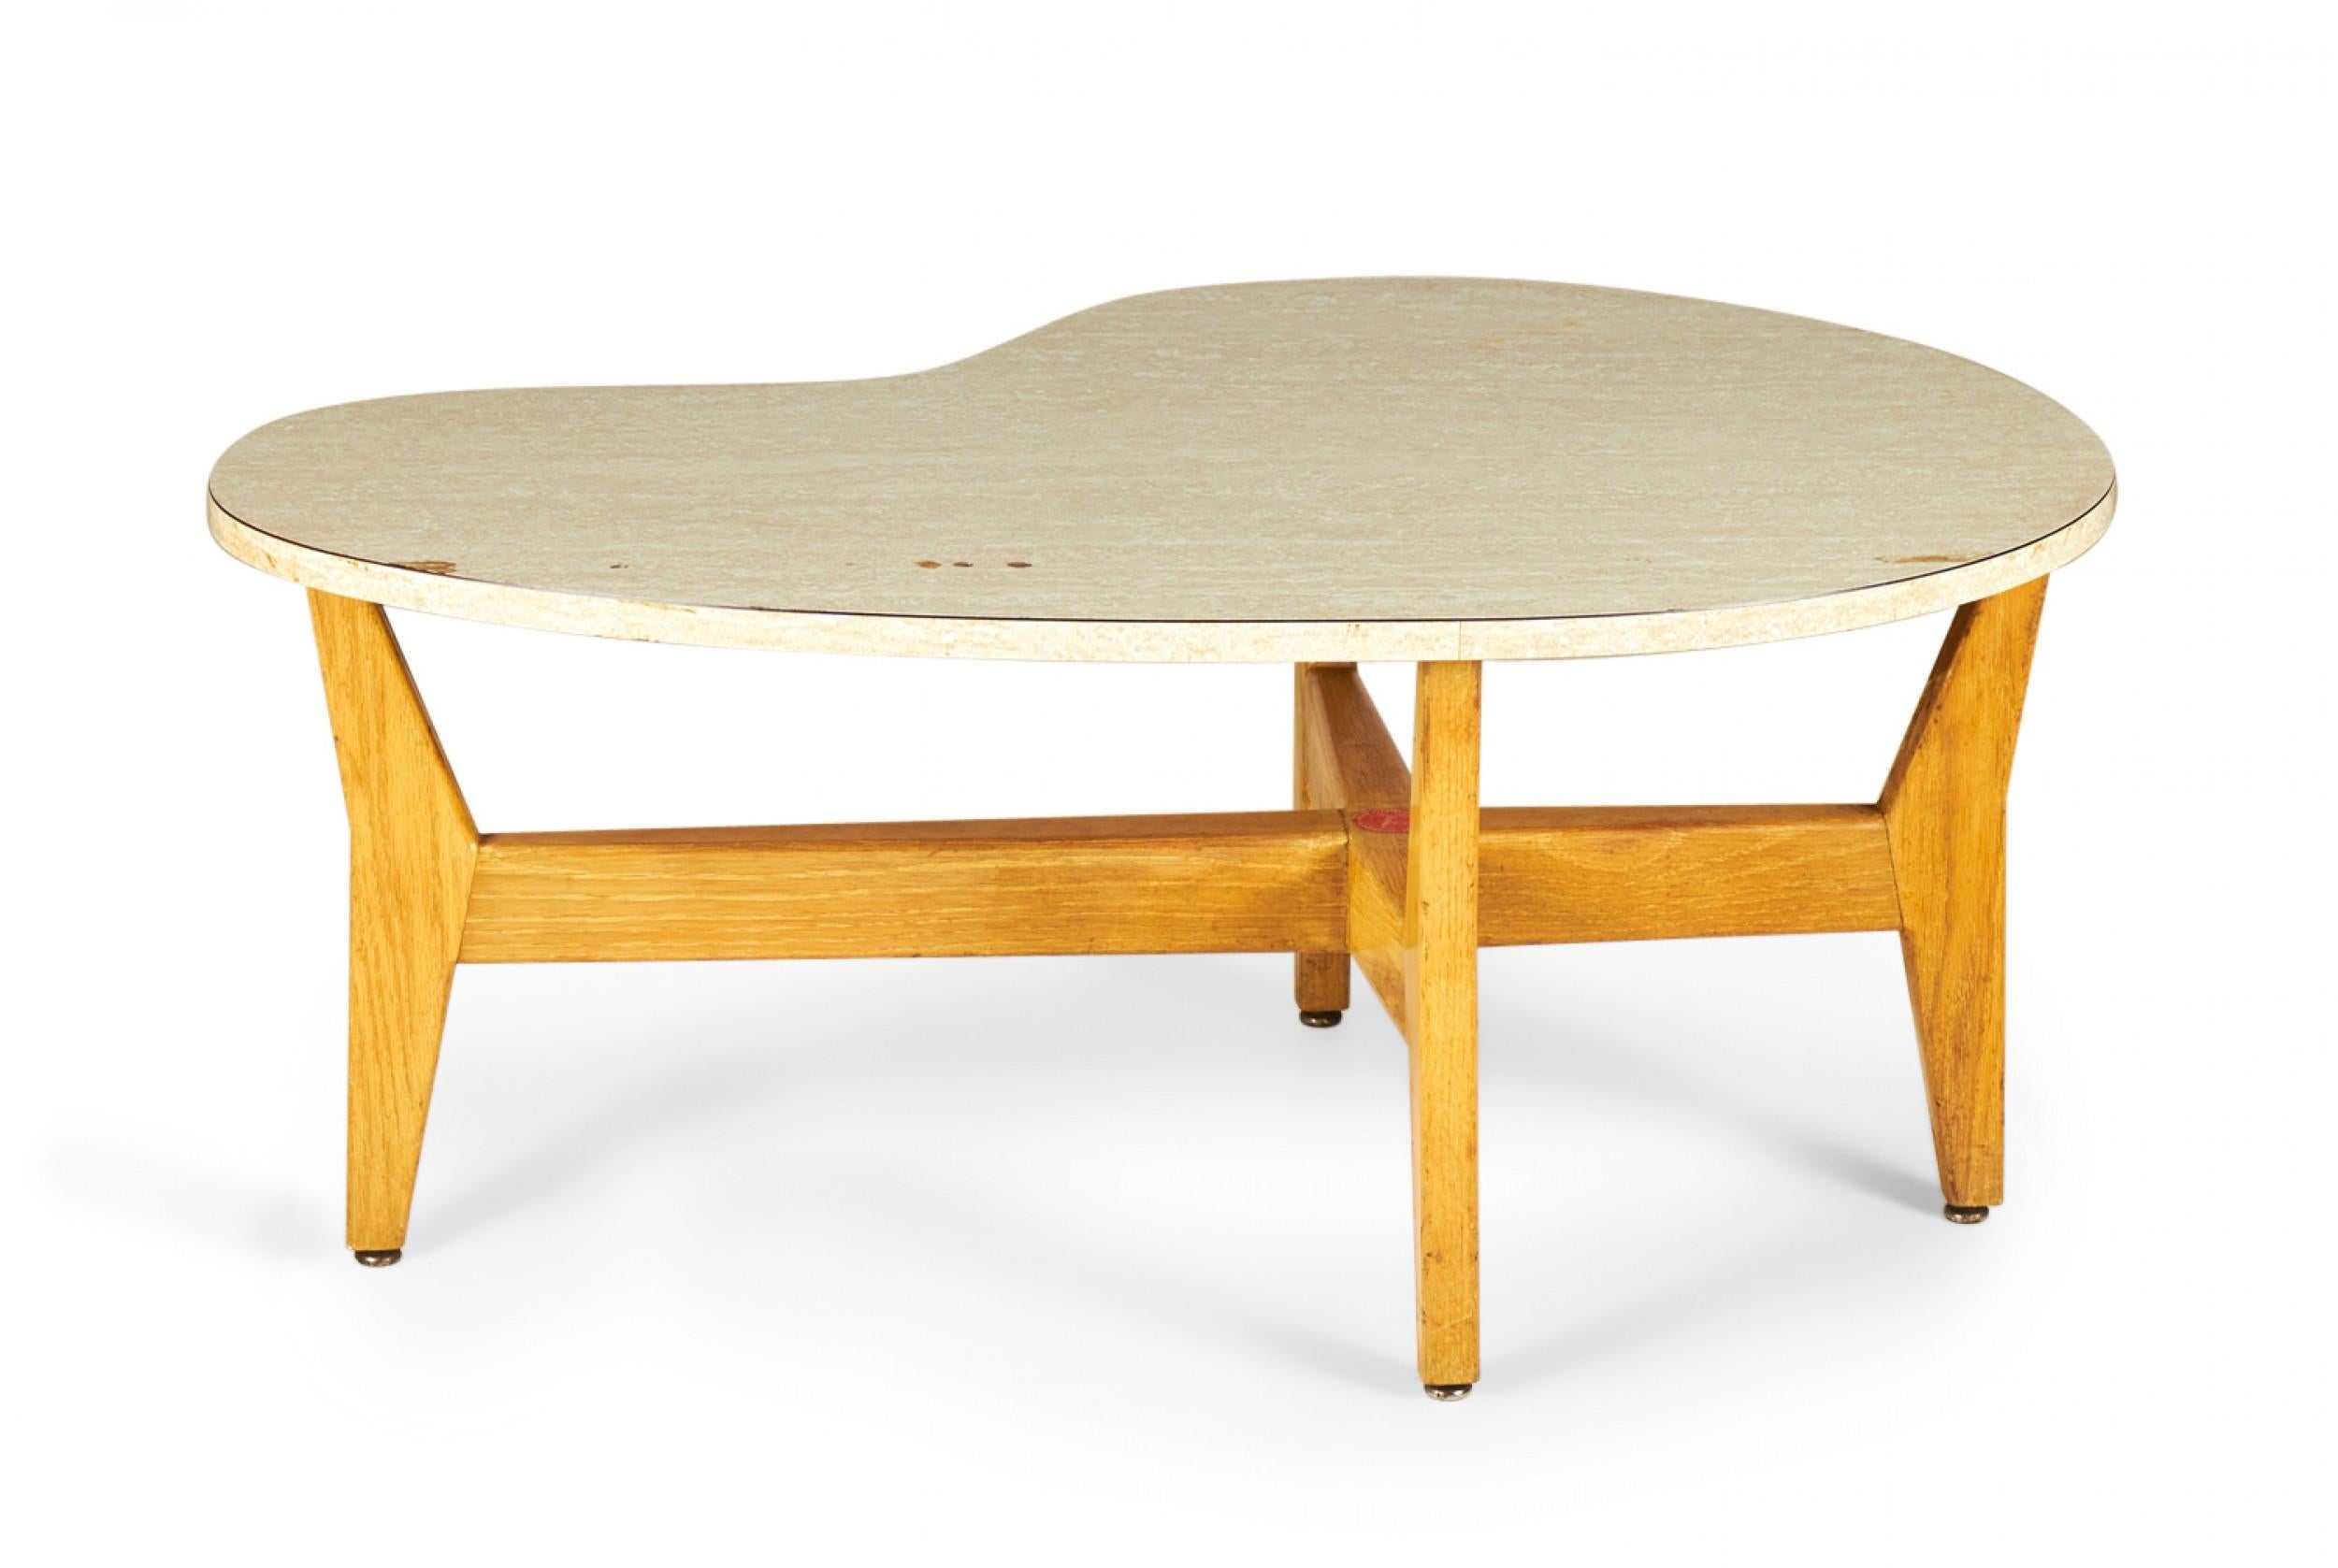 Danish Mid-Century coffee / cocktail table with a kidney-shaped table top with a beige marbled mica veneer resting on a walnut base with a cruciform stretcher and angled legs. (JENS RISOM)
